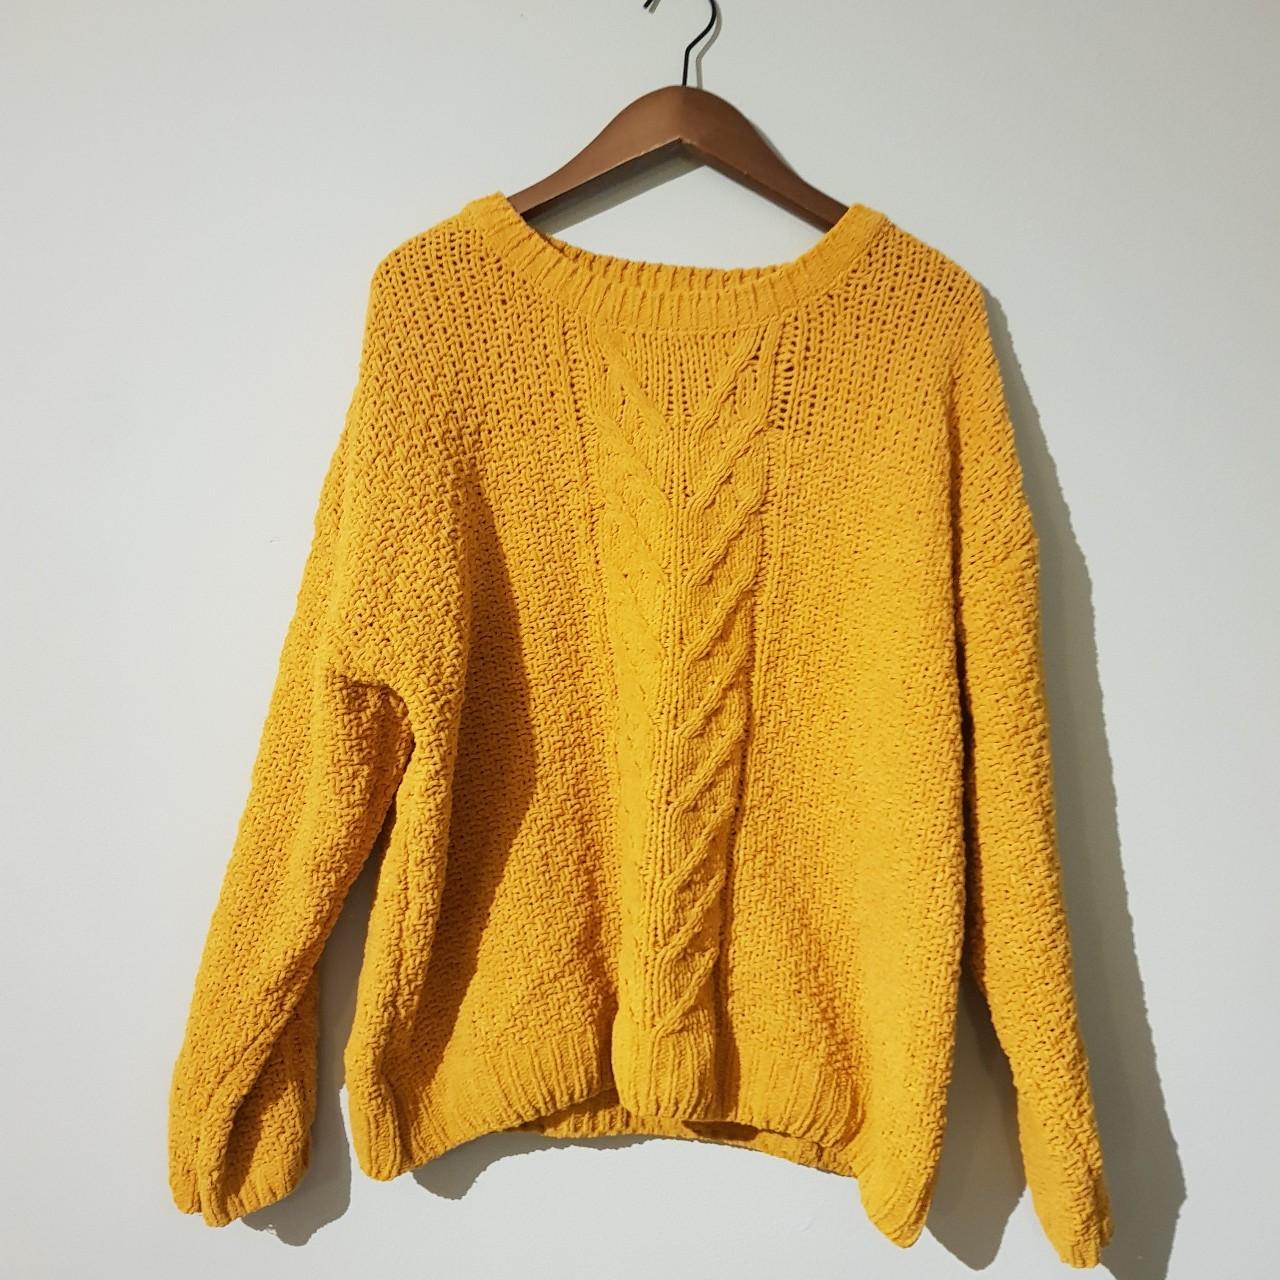 Yellow jumper - Primark Size M. Chunky wide knit... - Depop